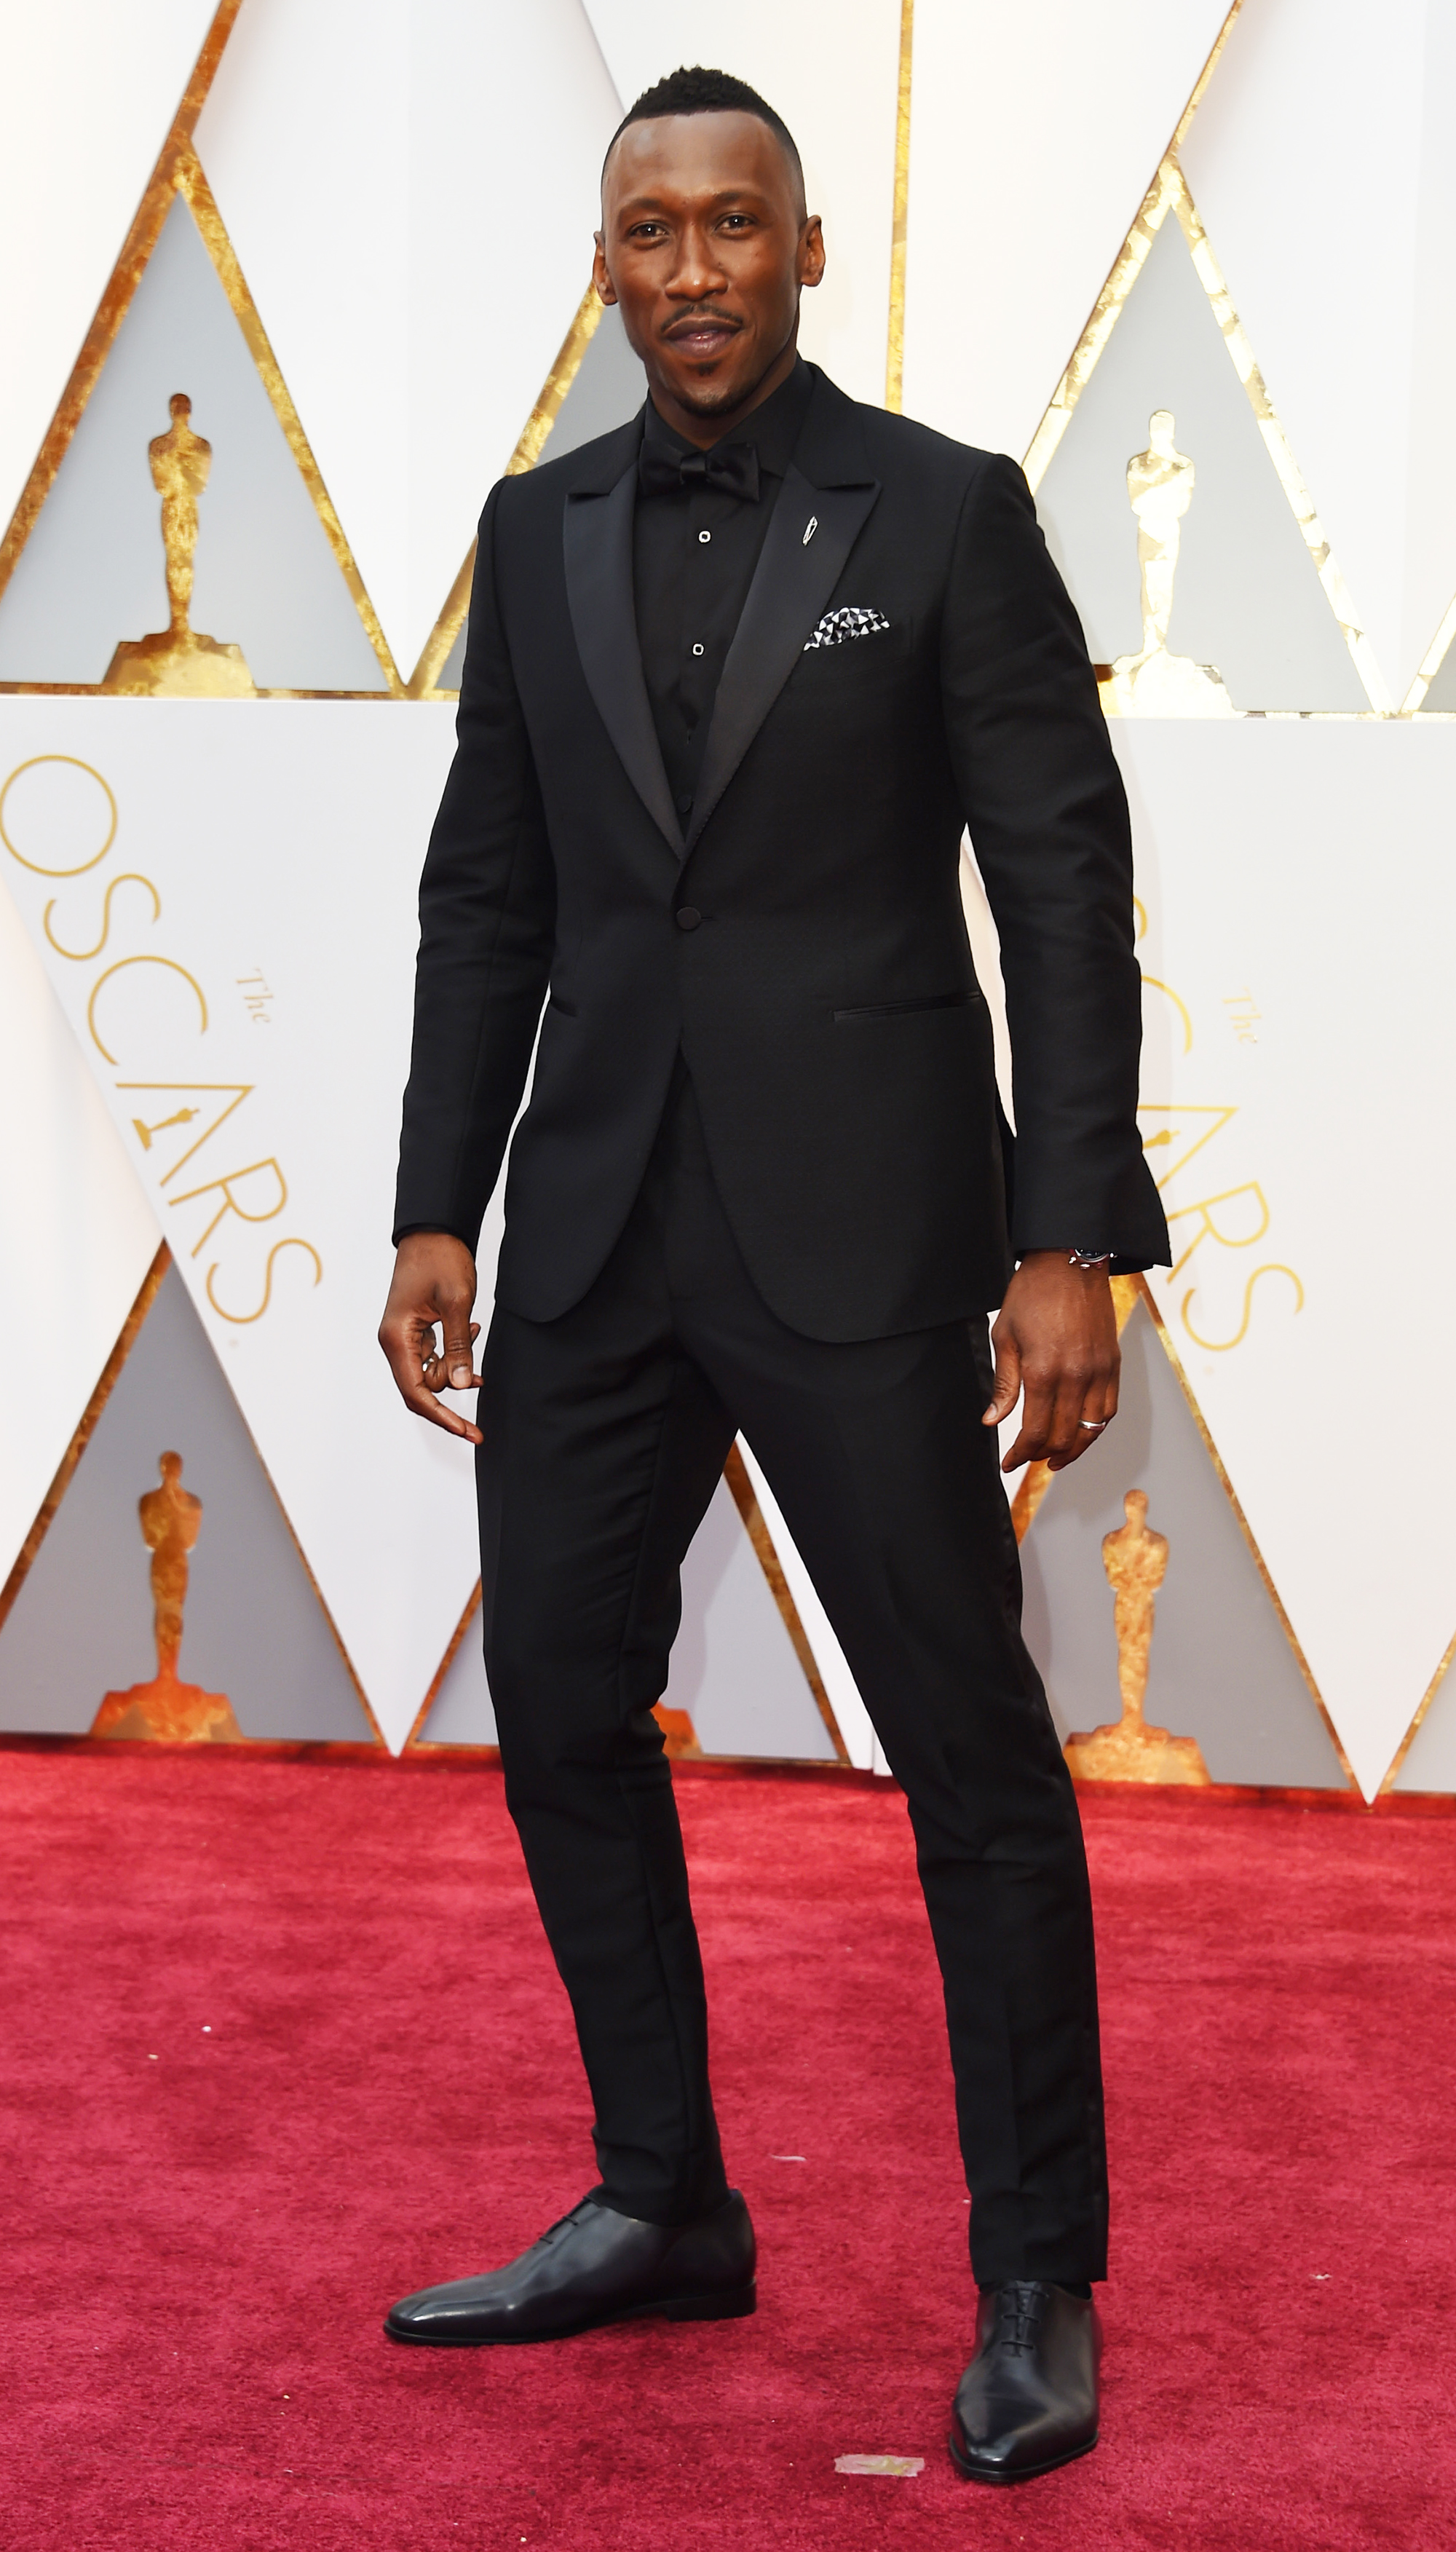 Mahershala Ali on the red carpet for the 89th Oscars, on Feb. 26, 2017 in Hollywood, Calif.